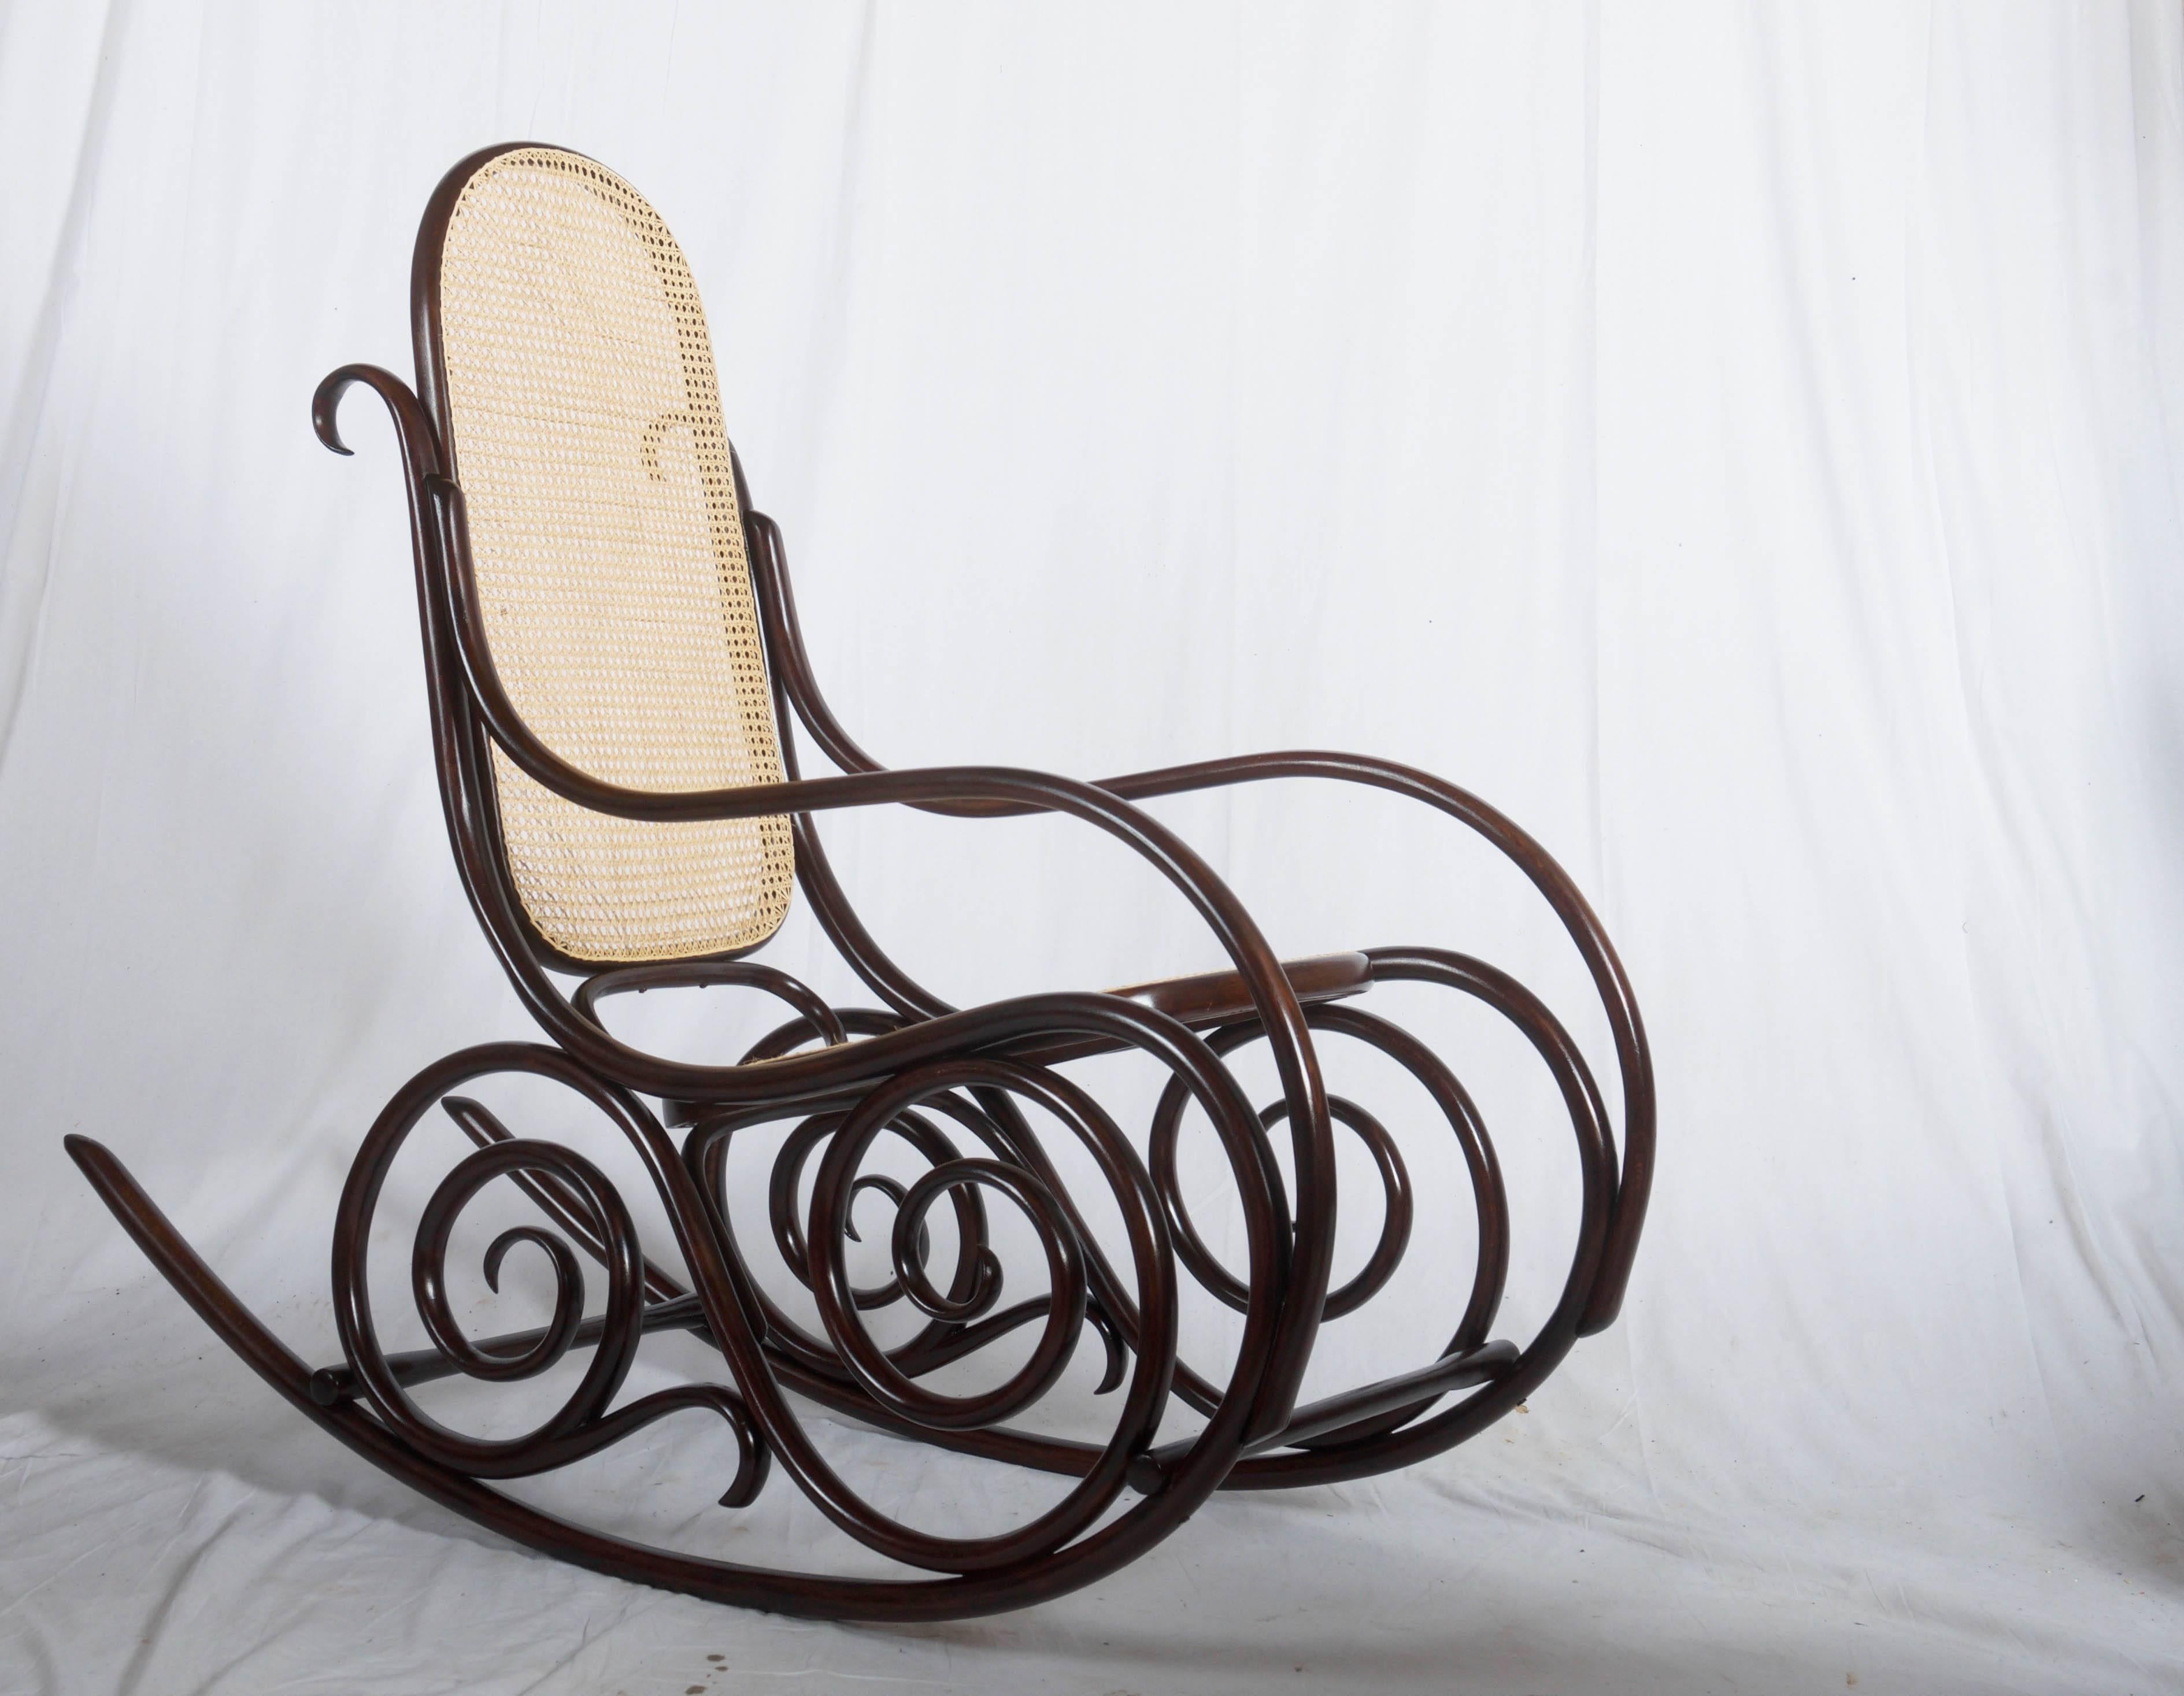 Thonet-Mundus rocking chair model number B829, fully restored with new canning.
Up to seven other models on request available. Made in the 1930 in Nowo Radomsko in Poland.